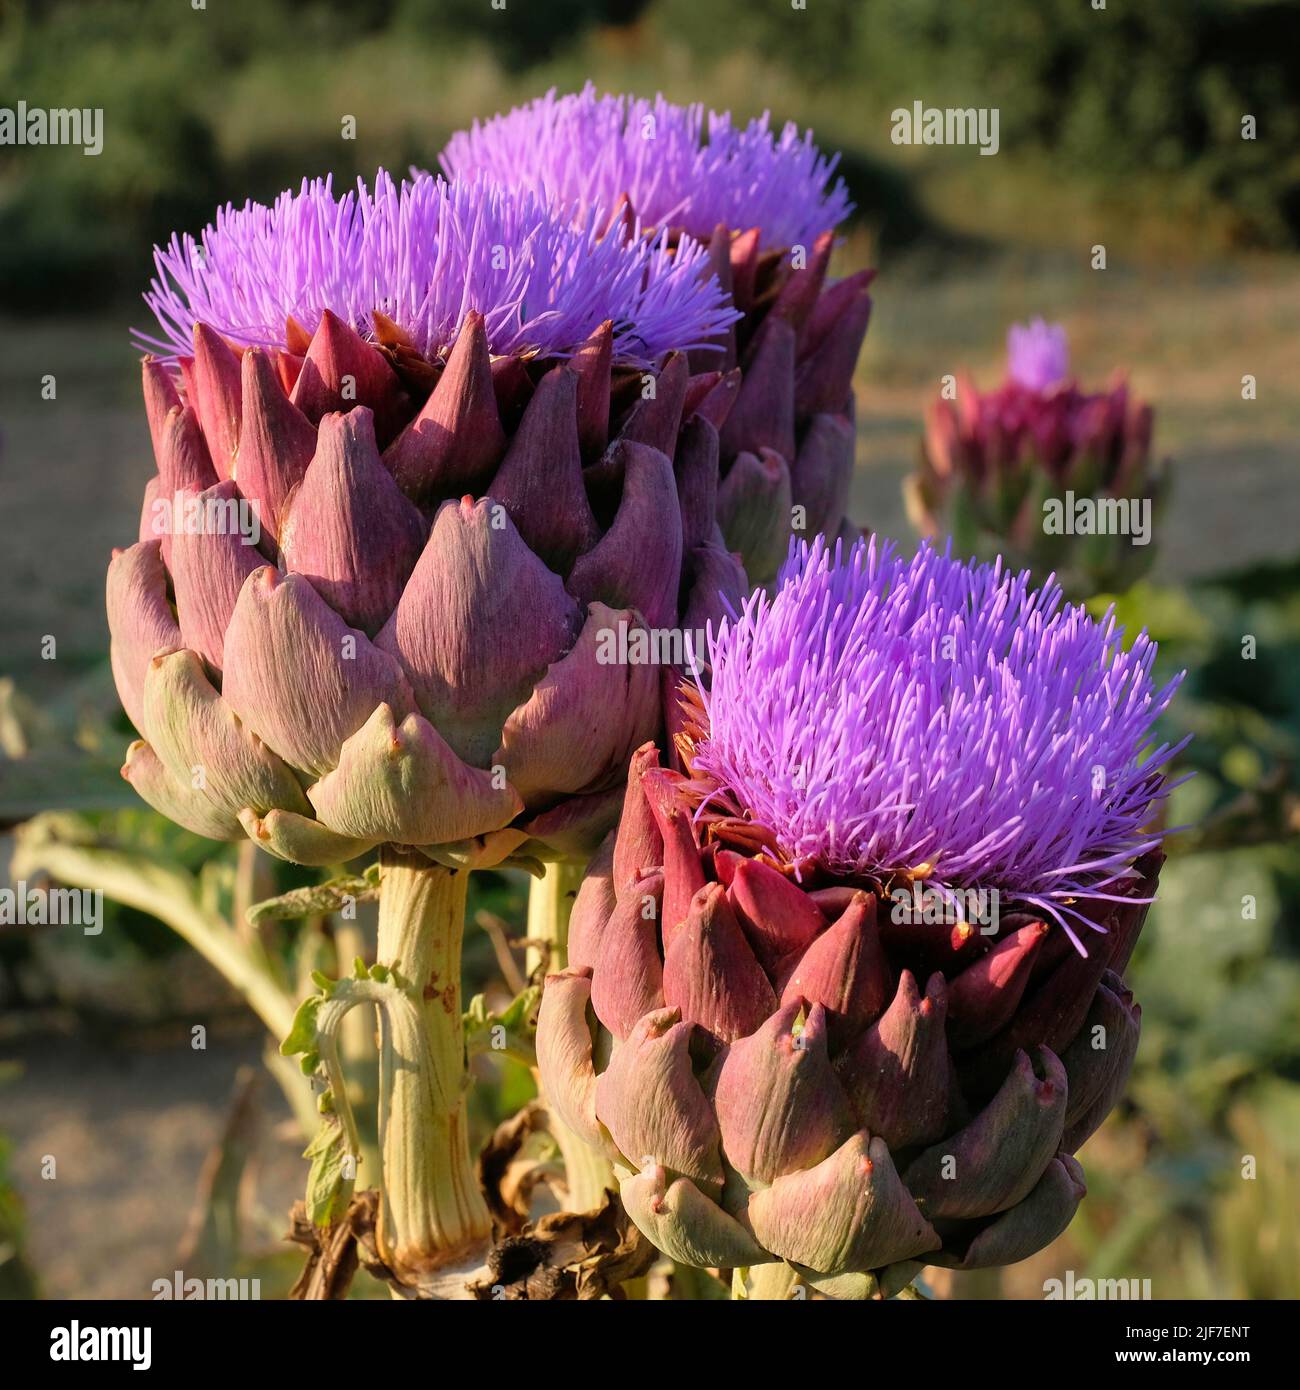 Close up image. Anemone like purple blooms of three artichokes. Numerous triangular scales of rich reds and greens. Soft focus background Stock Photo